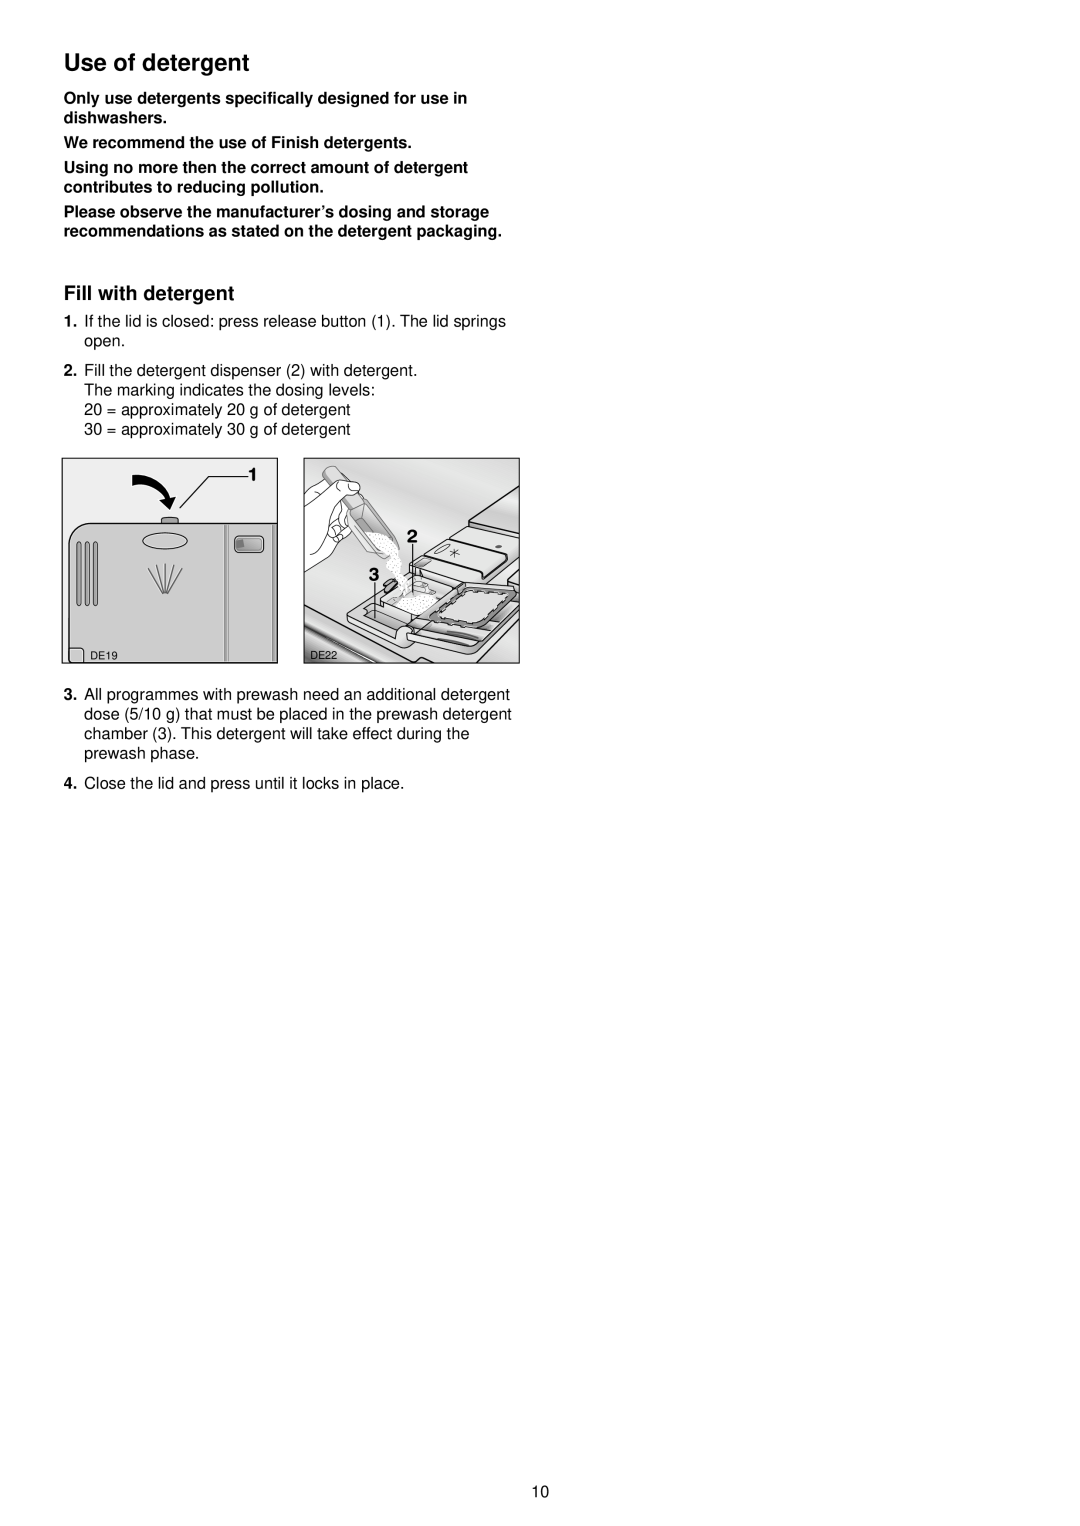 Zanussi ZSF 6120 manual Use of detergent, Fill with detergent 